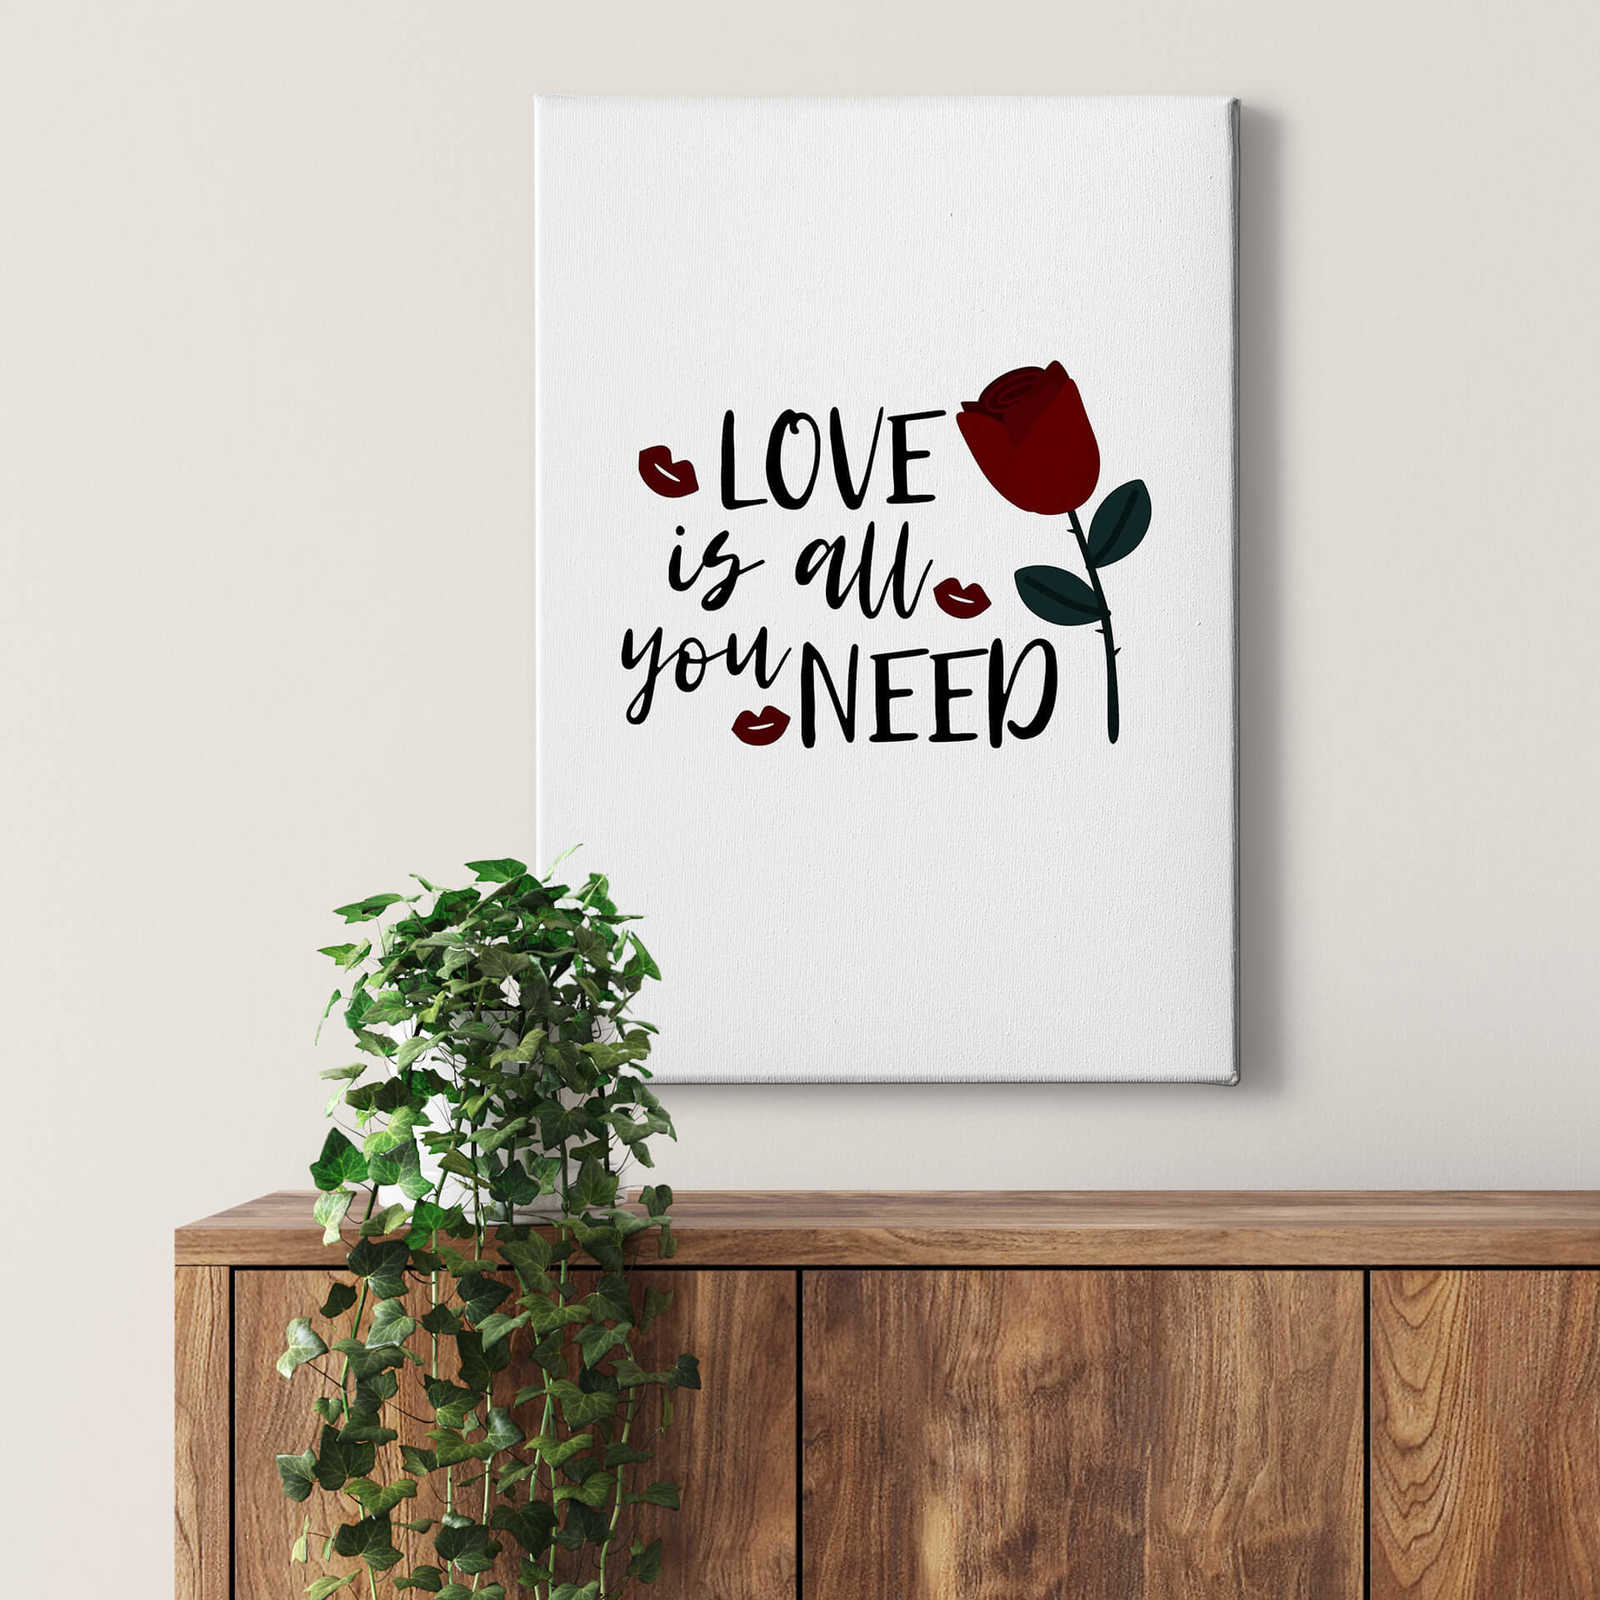             Tableau toile Proverbe love is all you need - 0,50 m x 0,70 m
        